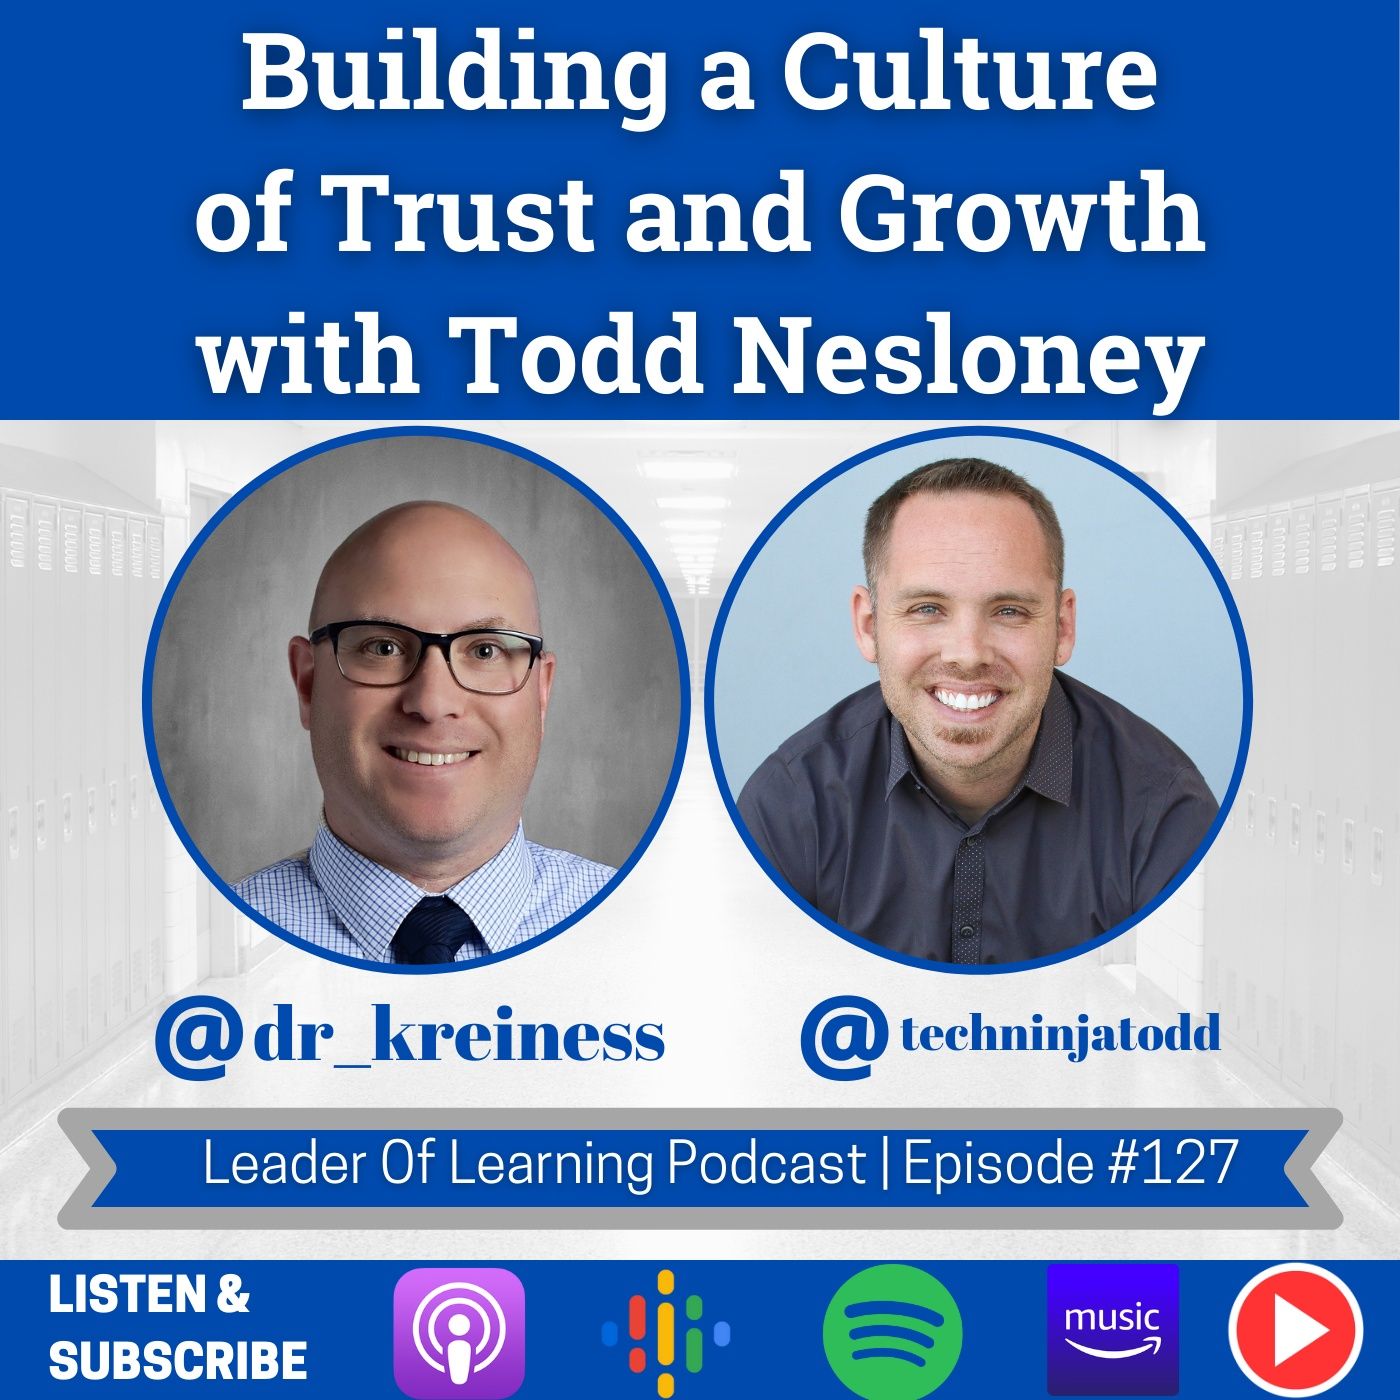 Building a Culture of Trust and Growth with Todd Nesloney Image